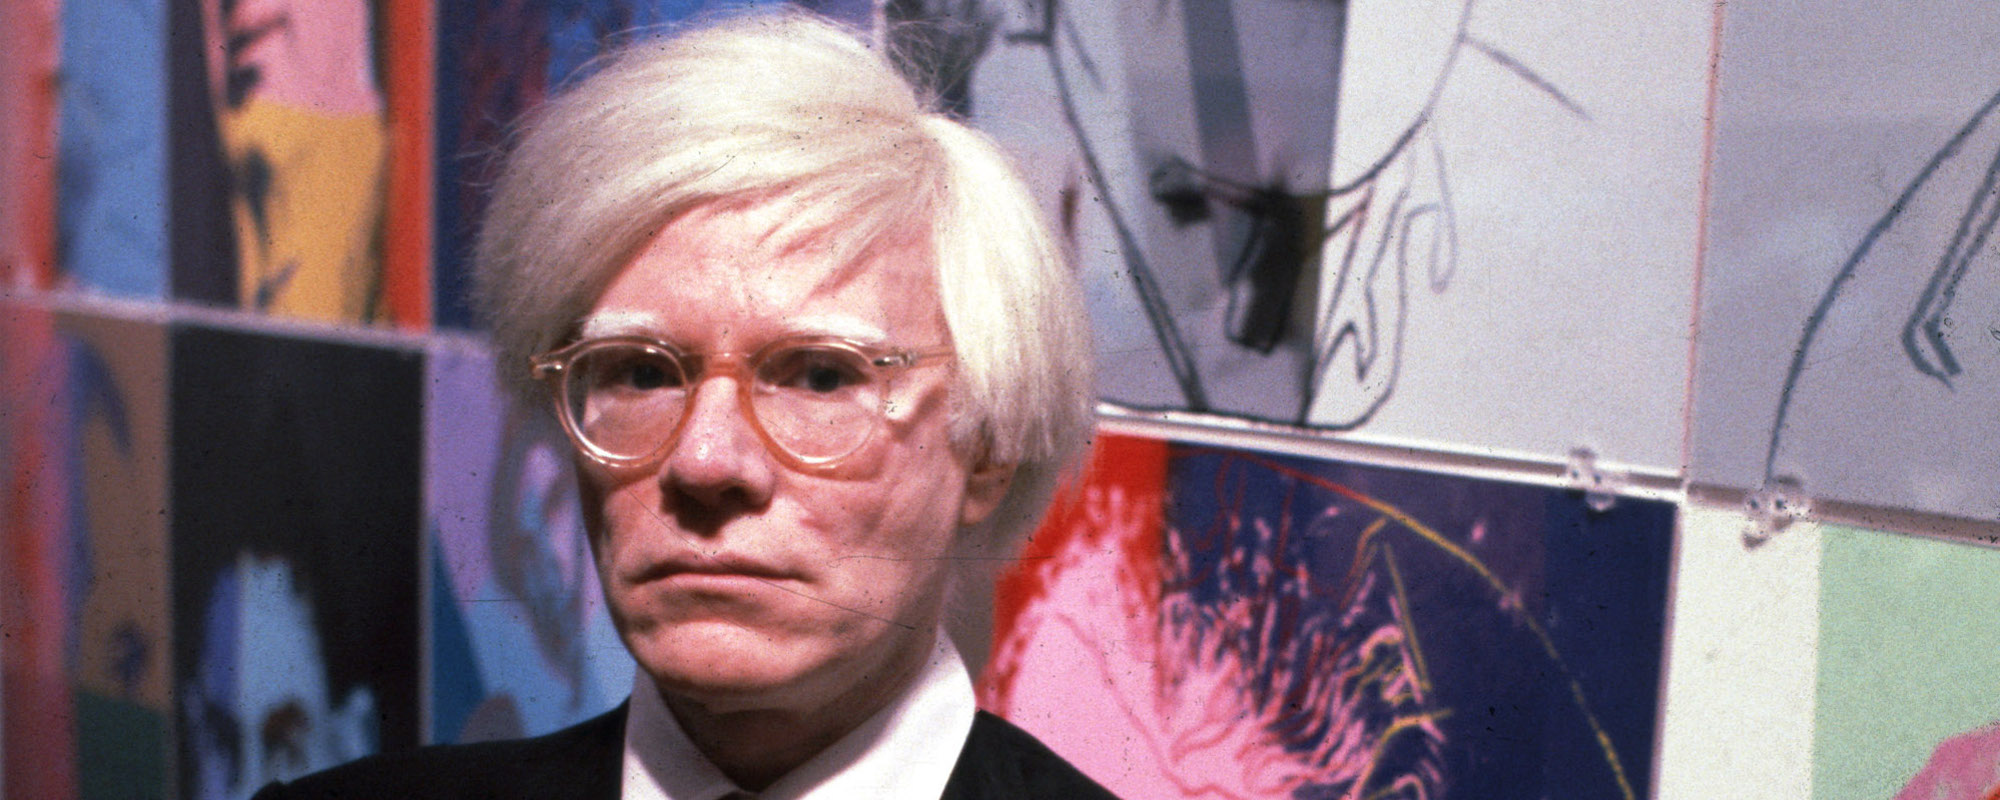 Andy Warhol Hated the Song David Bowie Wrote About Him